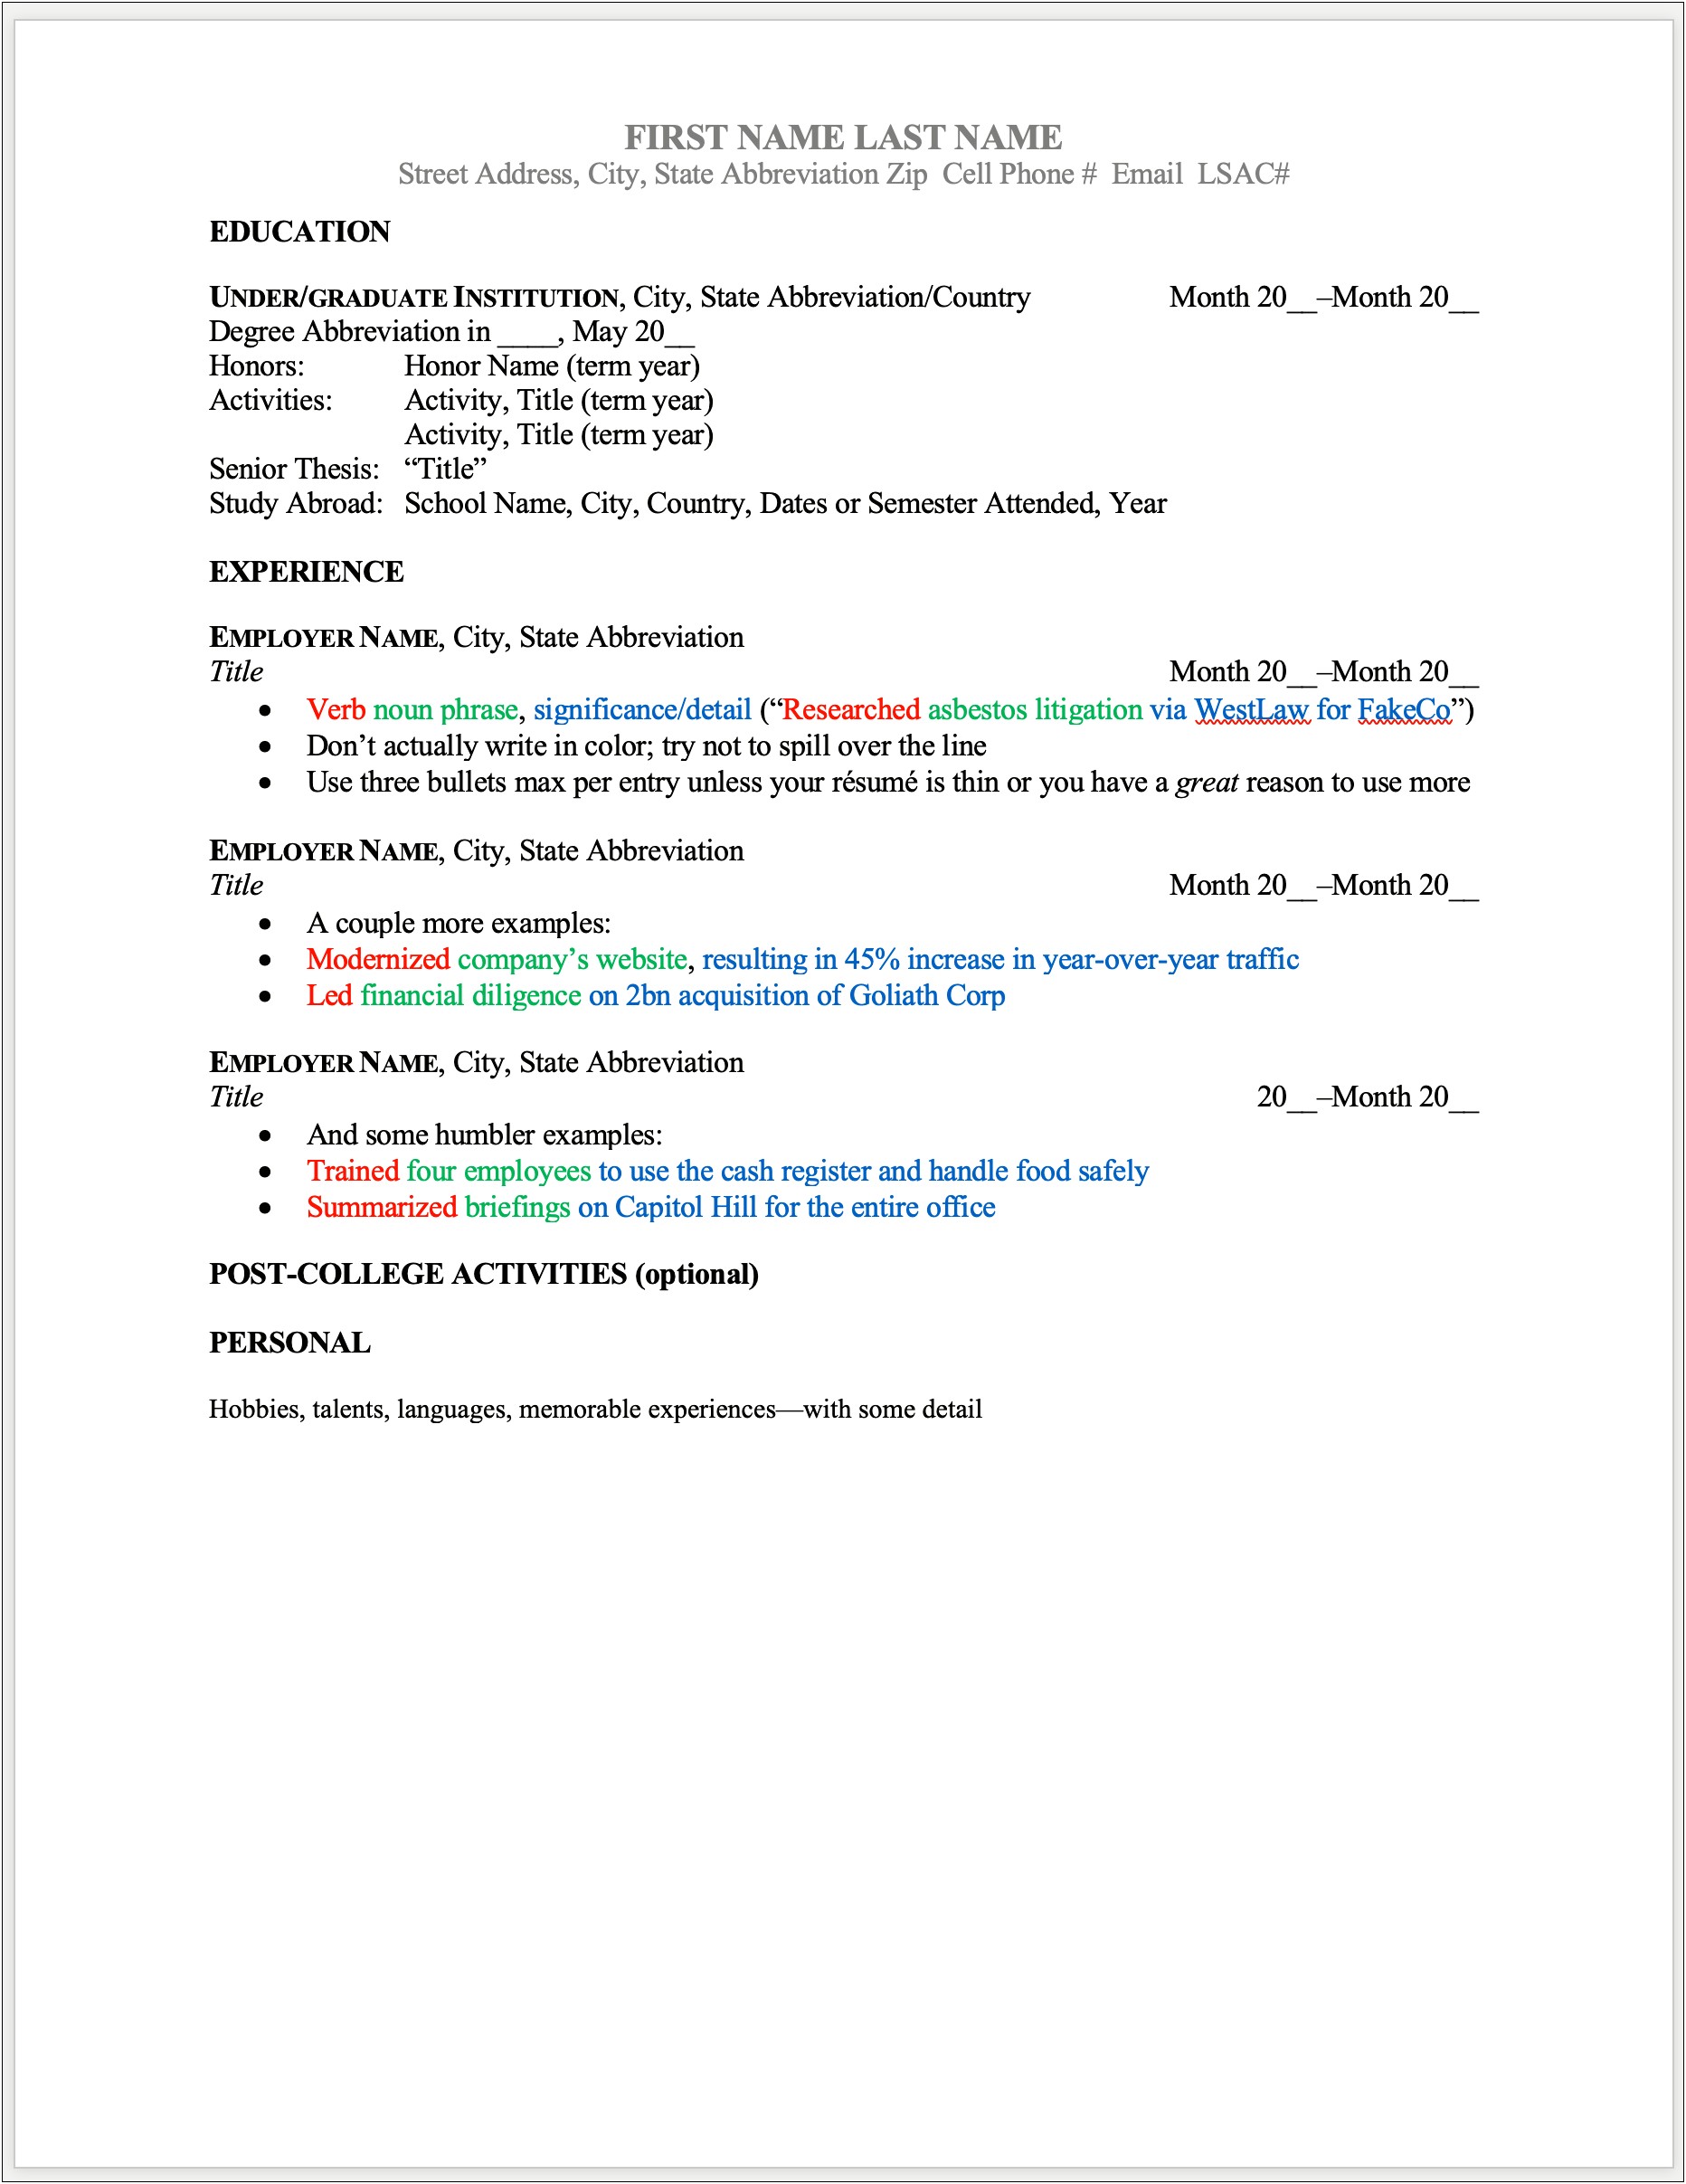 Resume Sample From An Admissions Officer